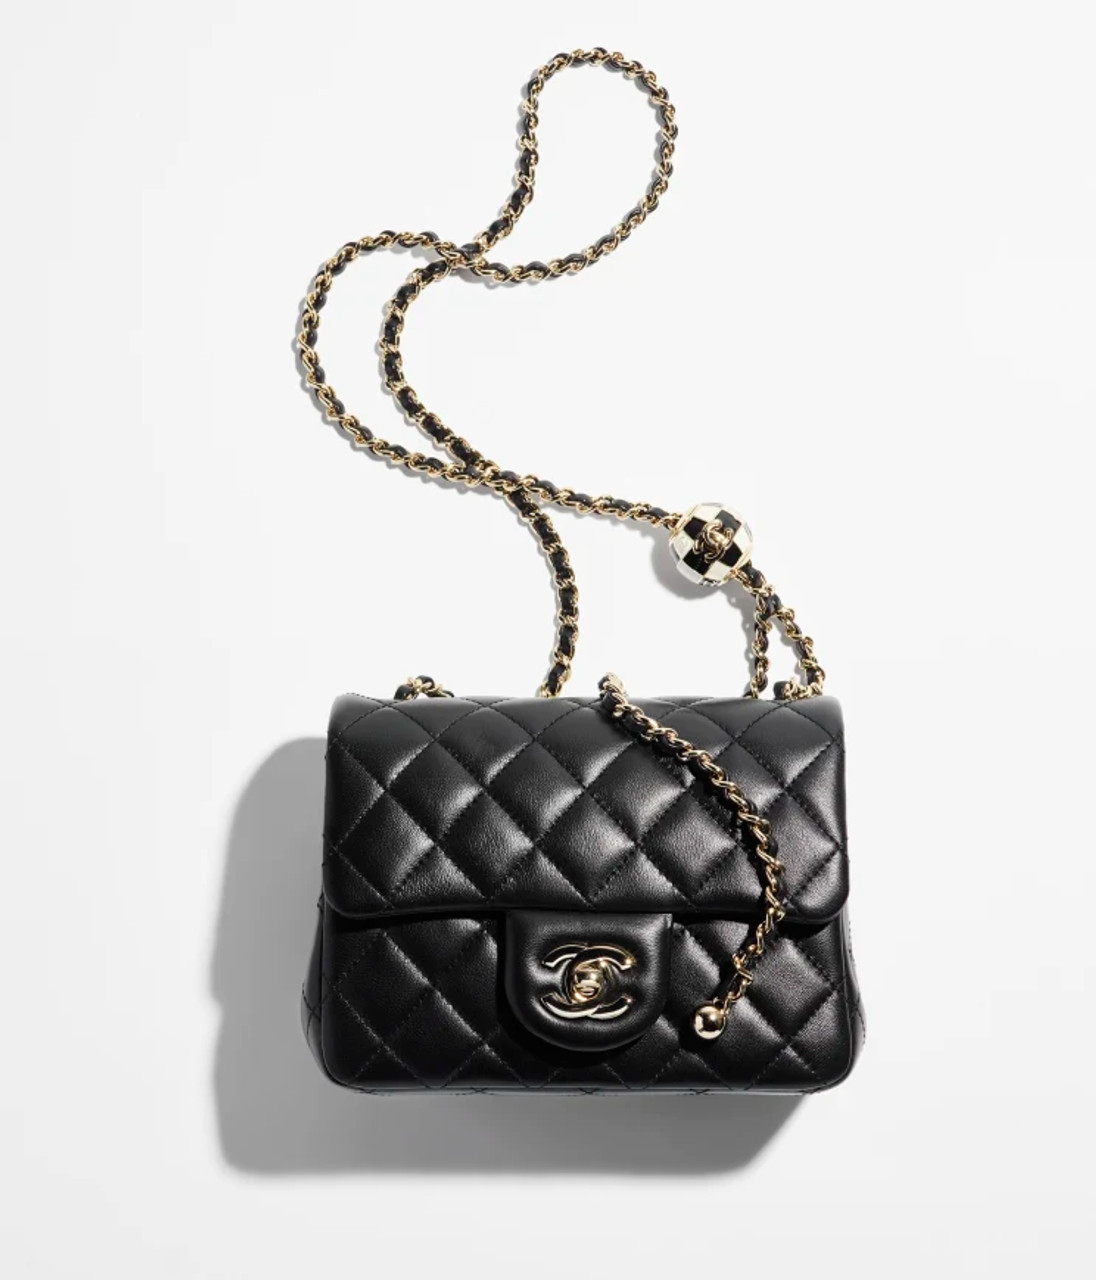 3 TOP CARE TIPS FOR YOUR CHANEL CLASSIC FLAP BAG | Luxe.It.Fwd